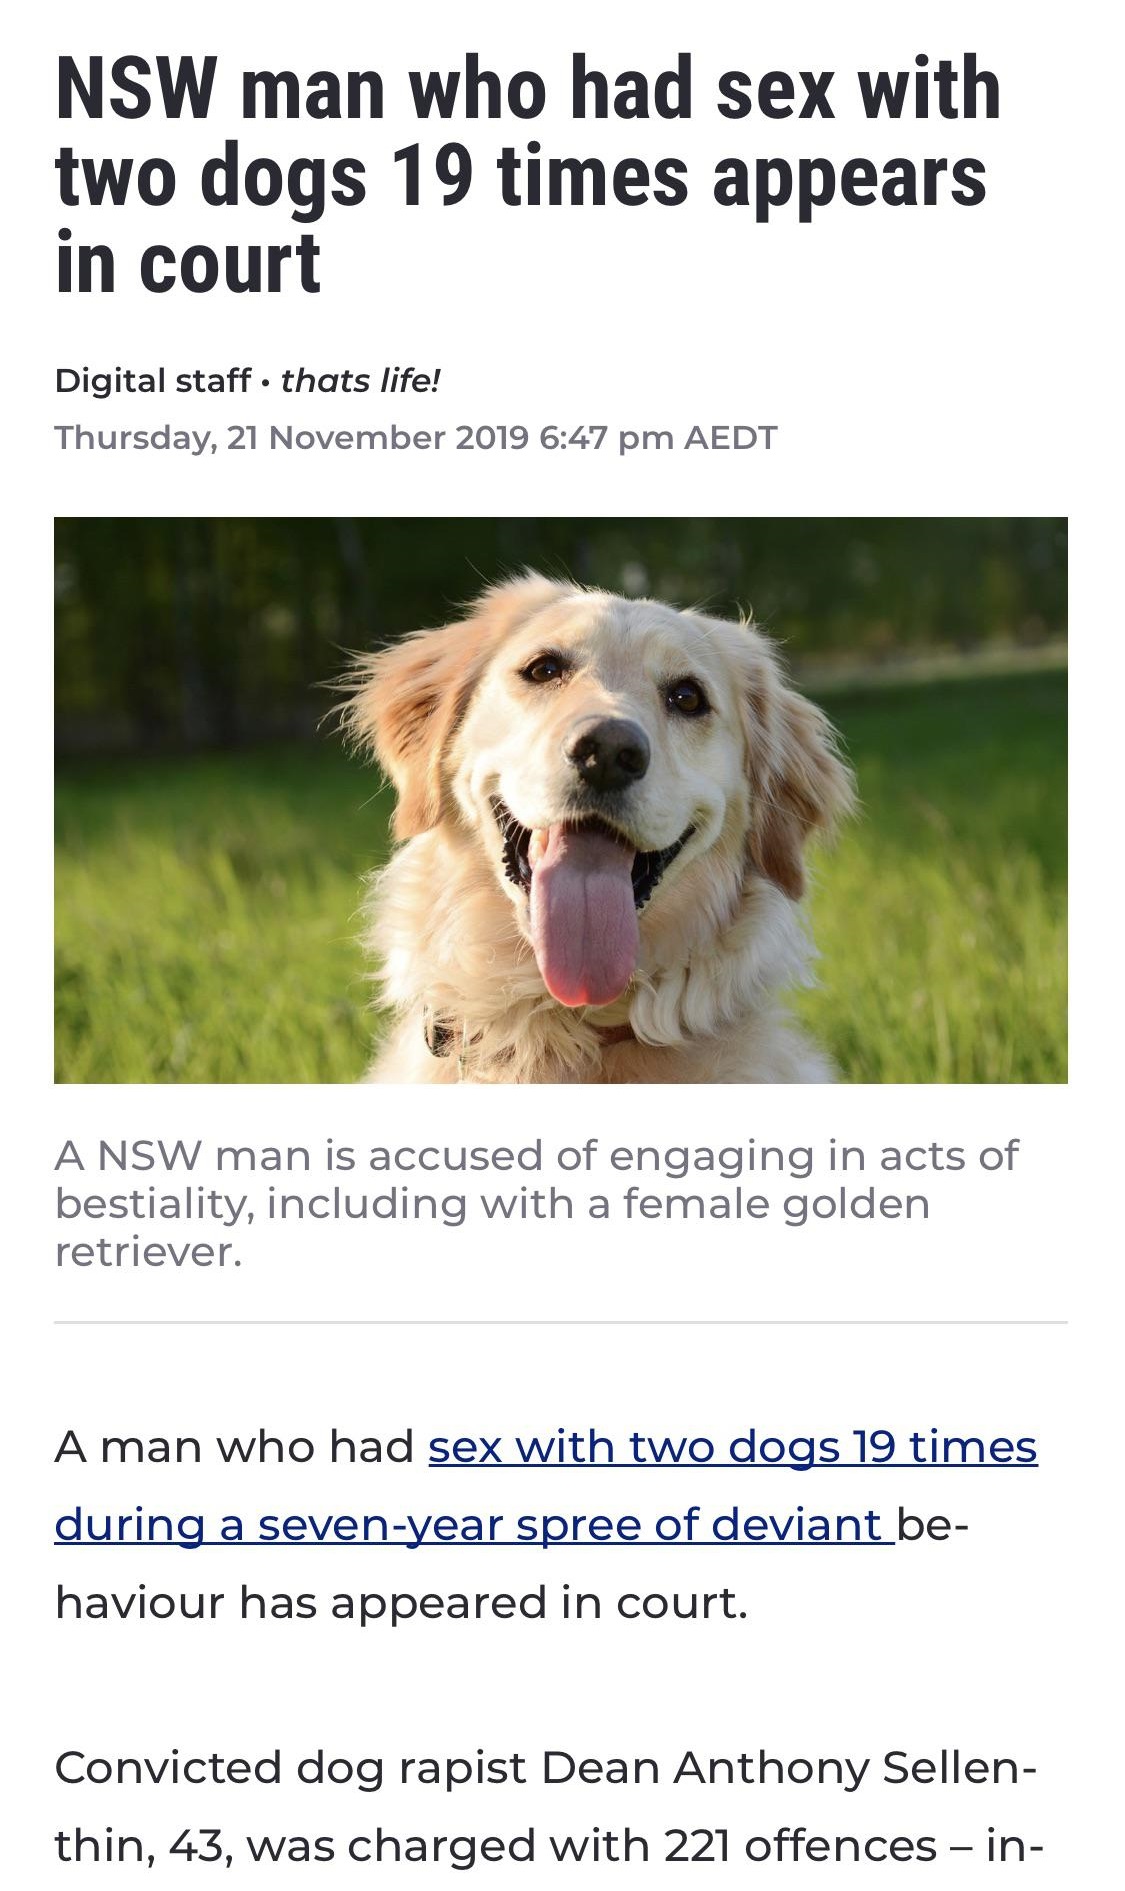 snout - Nsw man who had sex with two dogs 19 times appears in court Digital staff. thats life! Thursday, Aedt A Nsw man is accused of engaging in acts of bestiality, including with a female golden retriever. A man who had sex with two dogs 19 times during